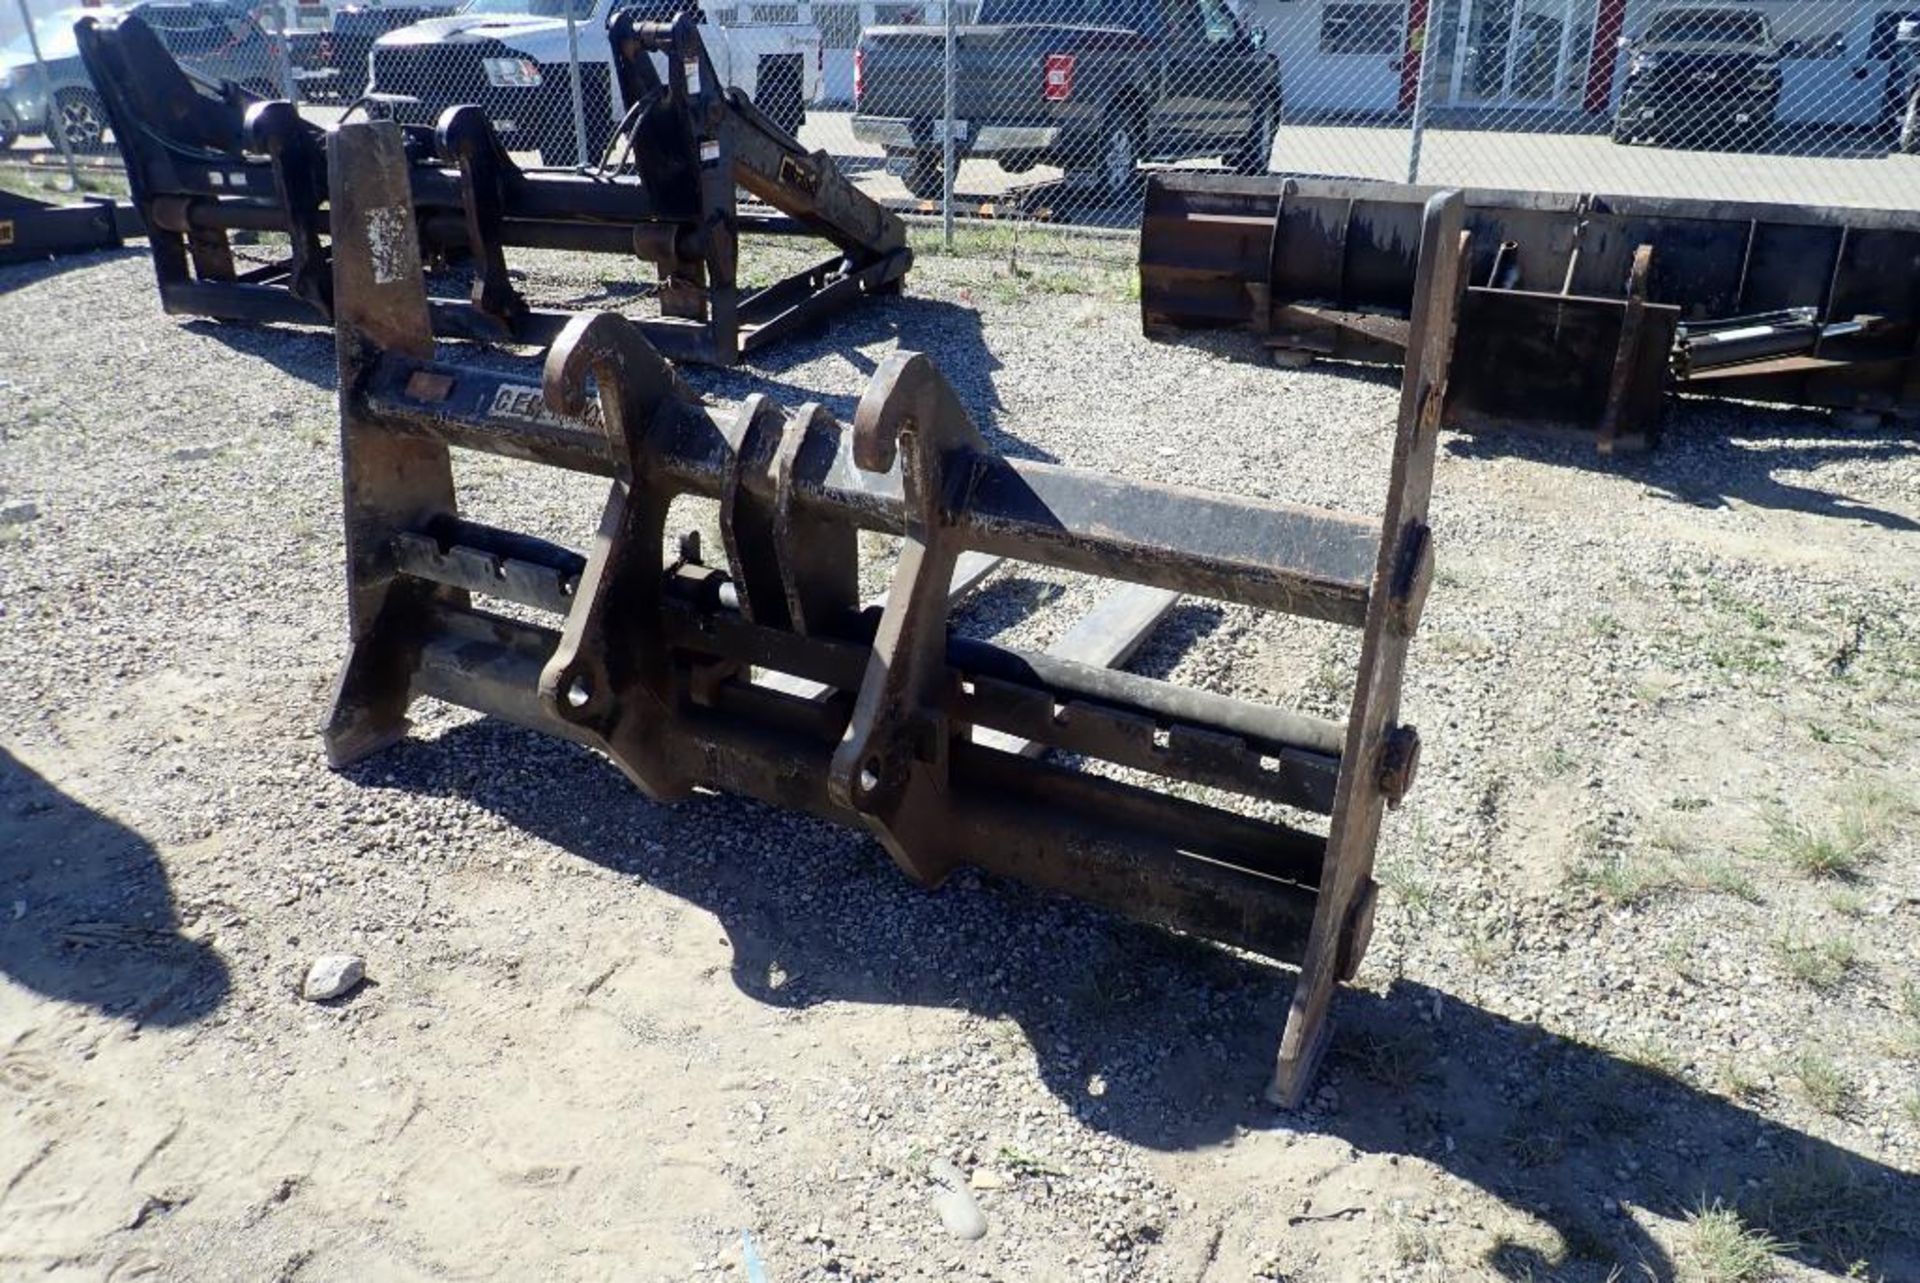 CEM Equipment QA 50" Pallet Forks Attachment for Hyundai HL740-9 Loader. NOTE: REMOVAL AUG 17TH. - Image 2 of 3